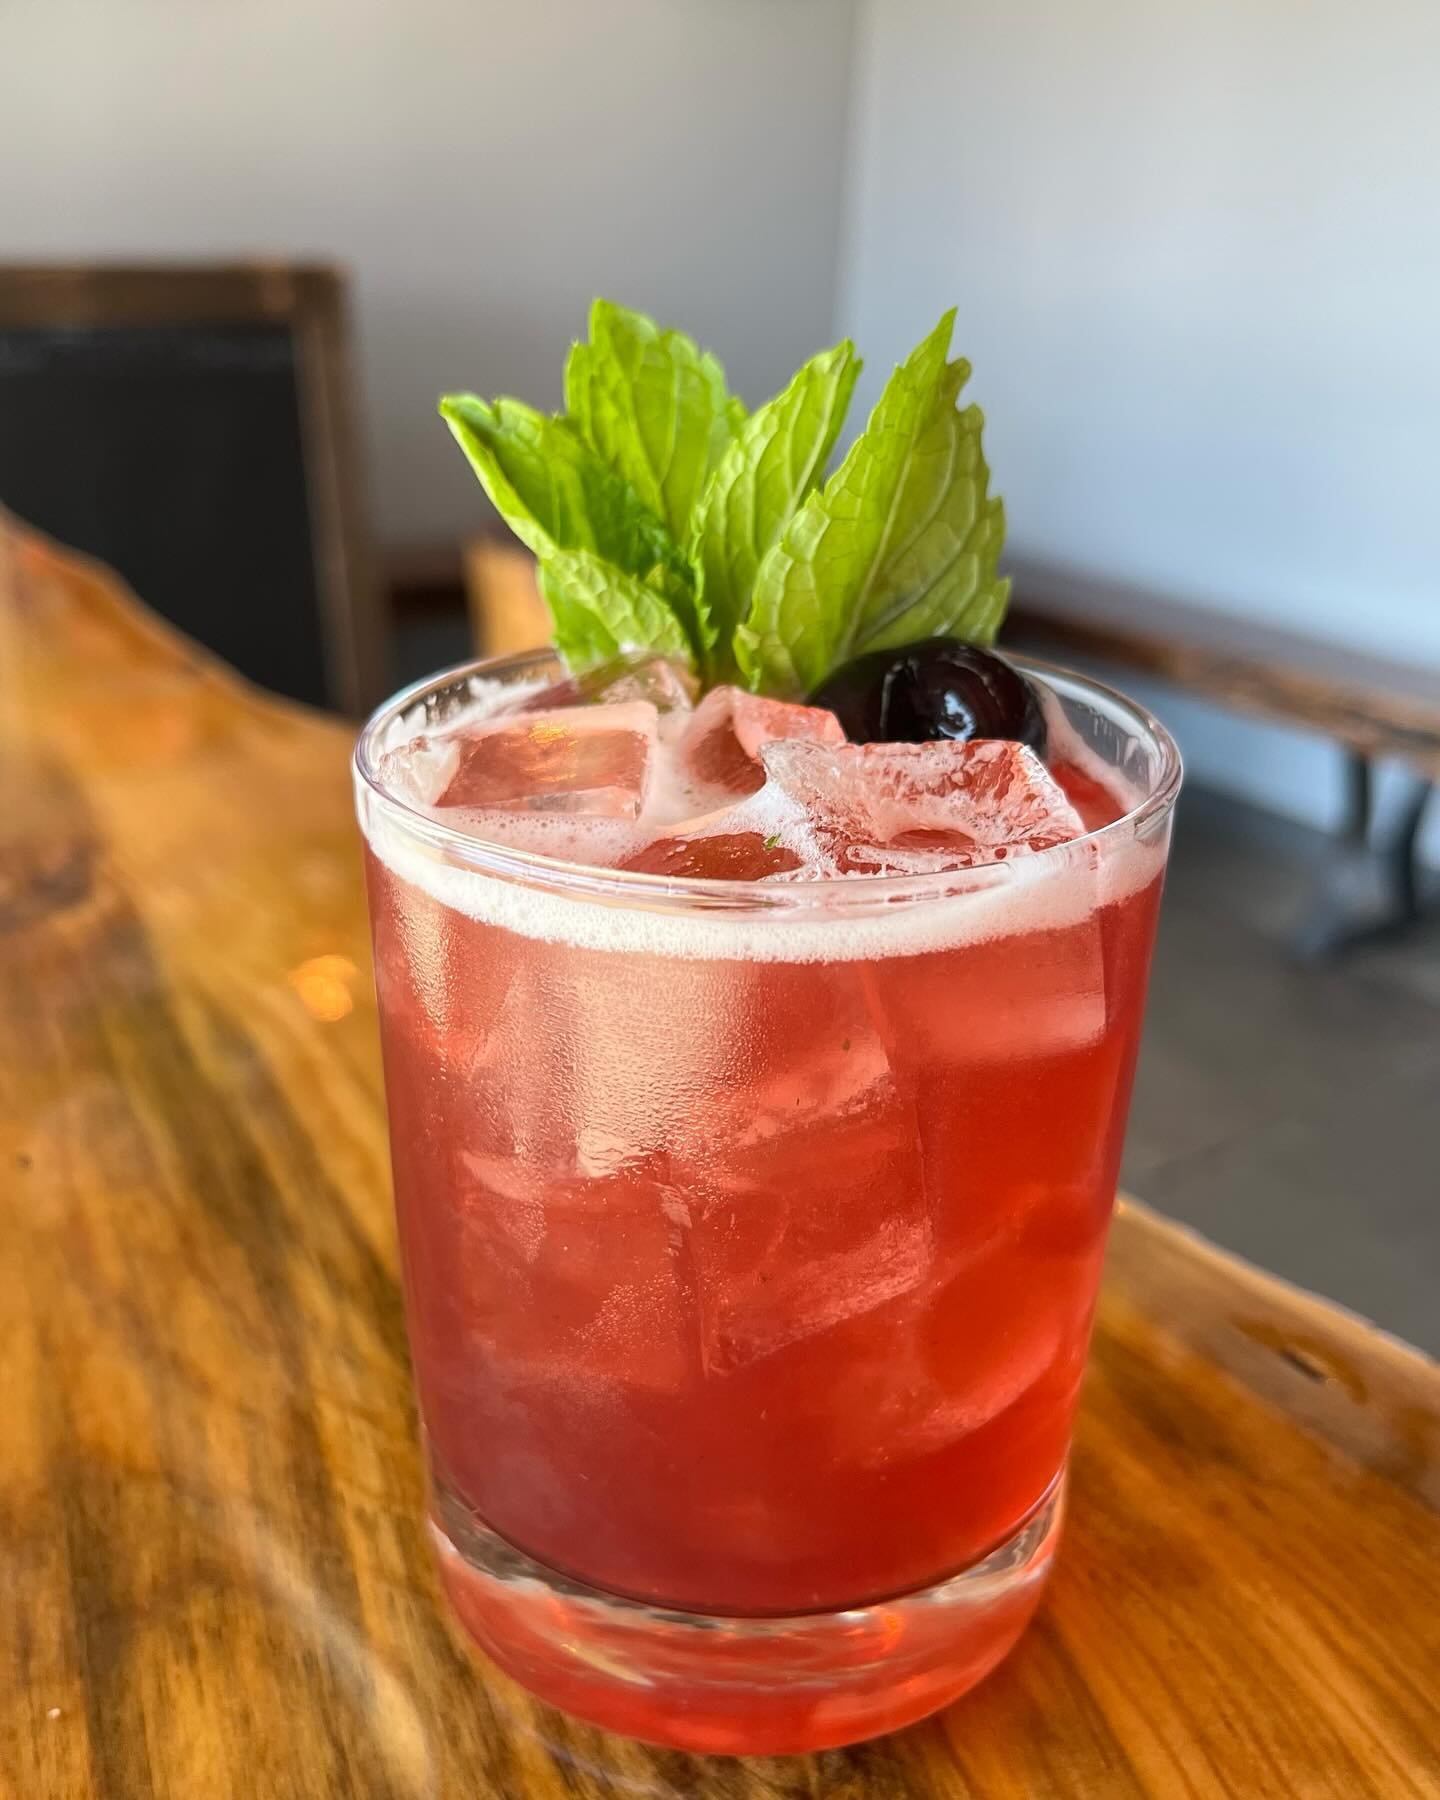 The Cherry Smash has arrived and we cannot get enough! Refreshing, easy sipping, and simply delicious! 

🍒Bourbon &bull; Rye Cherry Liqueur &bull; mint &bull; lemon &bull; simple 

#elevation5003distillery #elevatingspiritslocally #bourbon #whiskey 